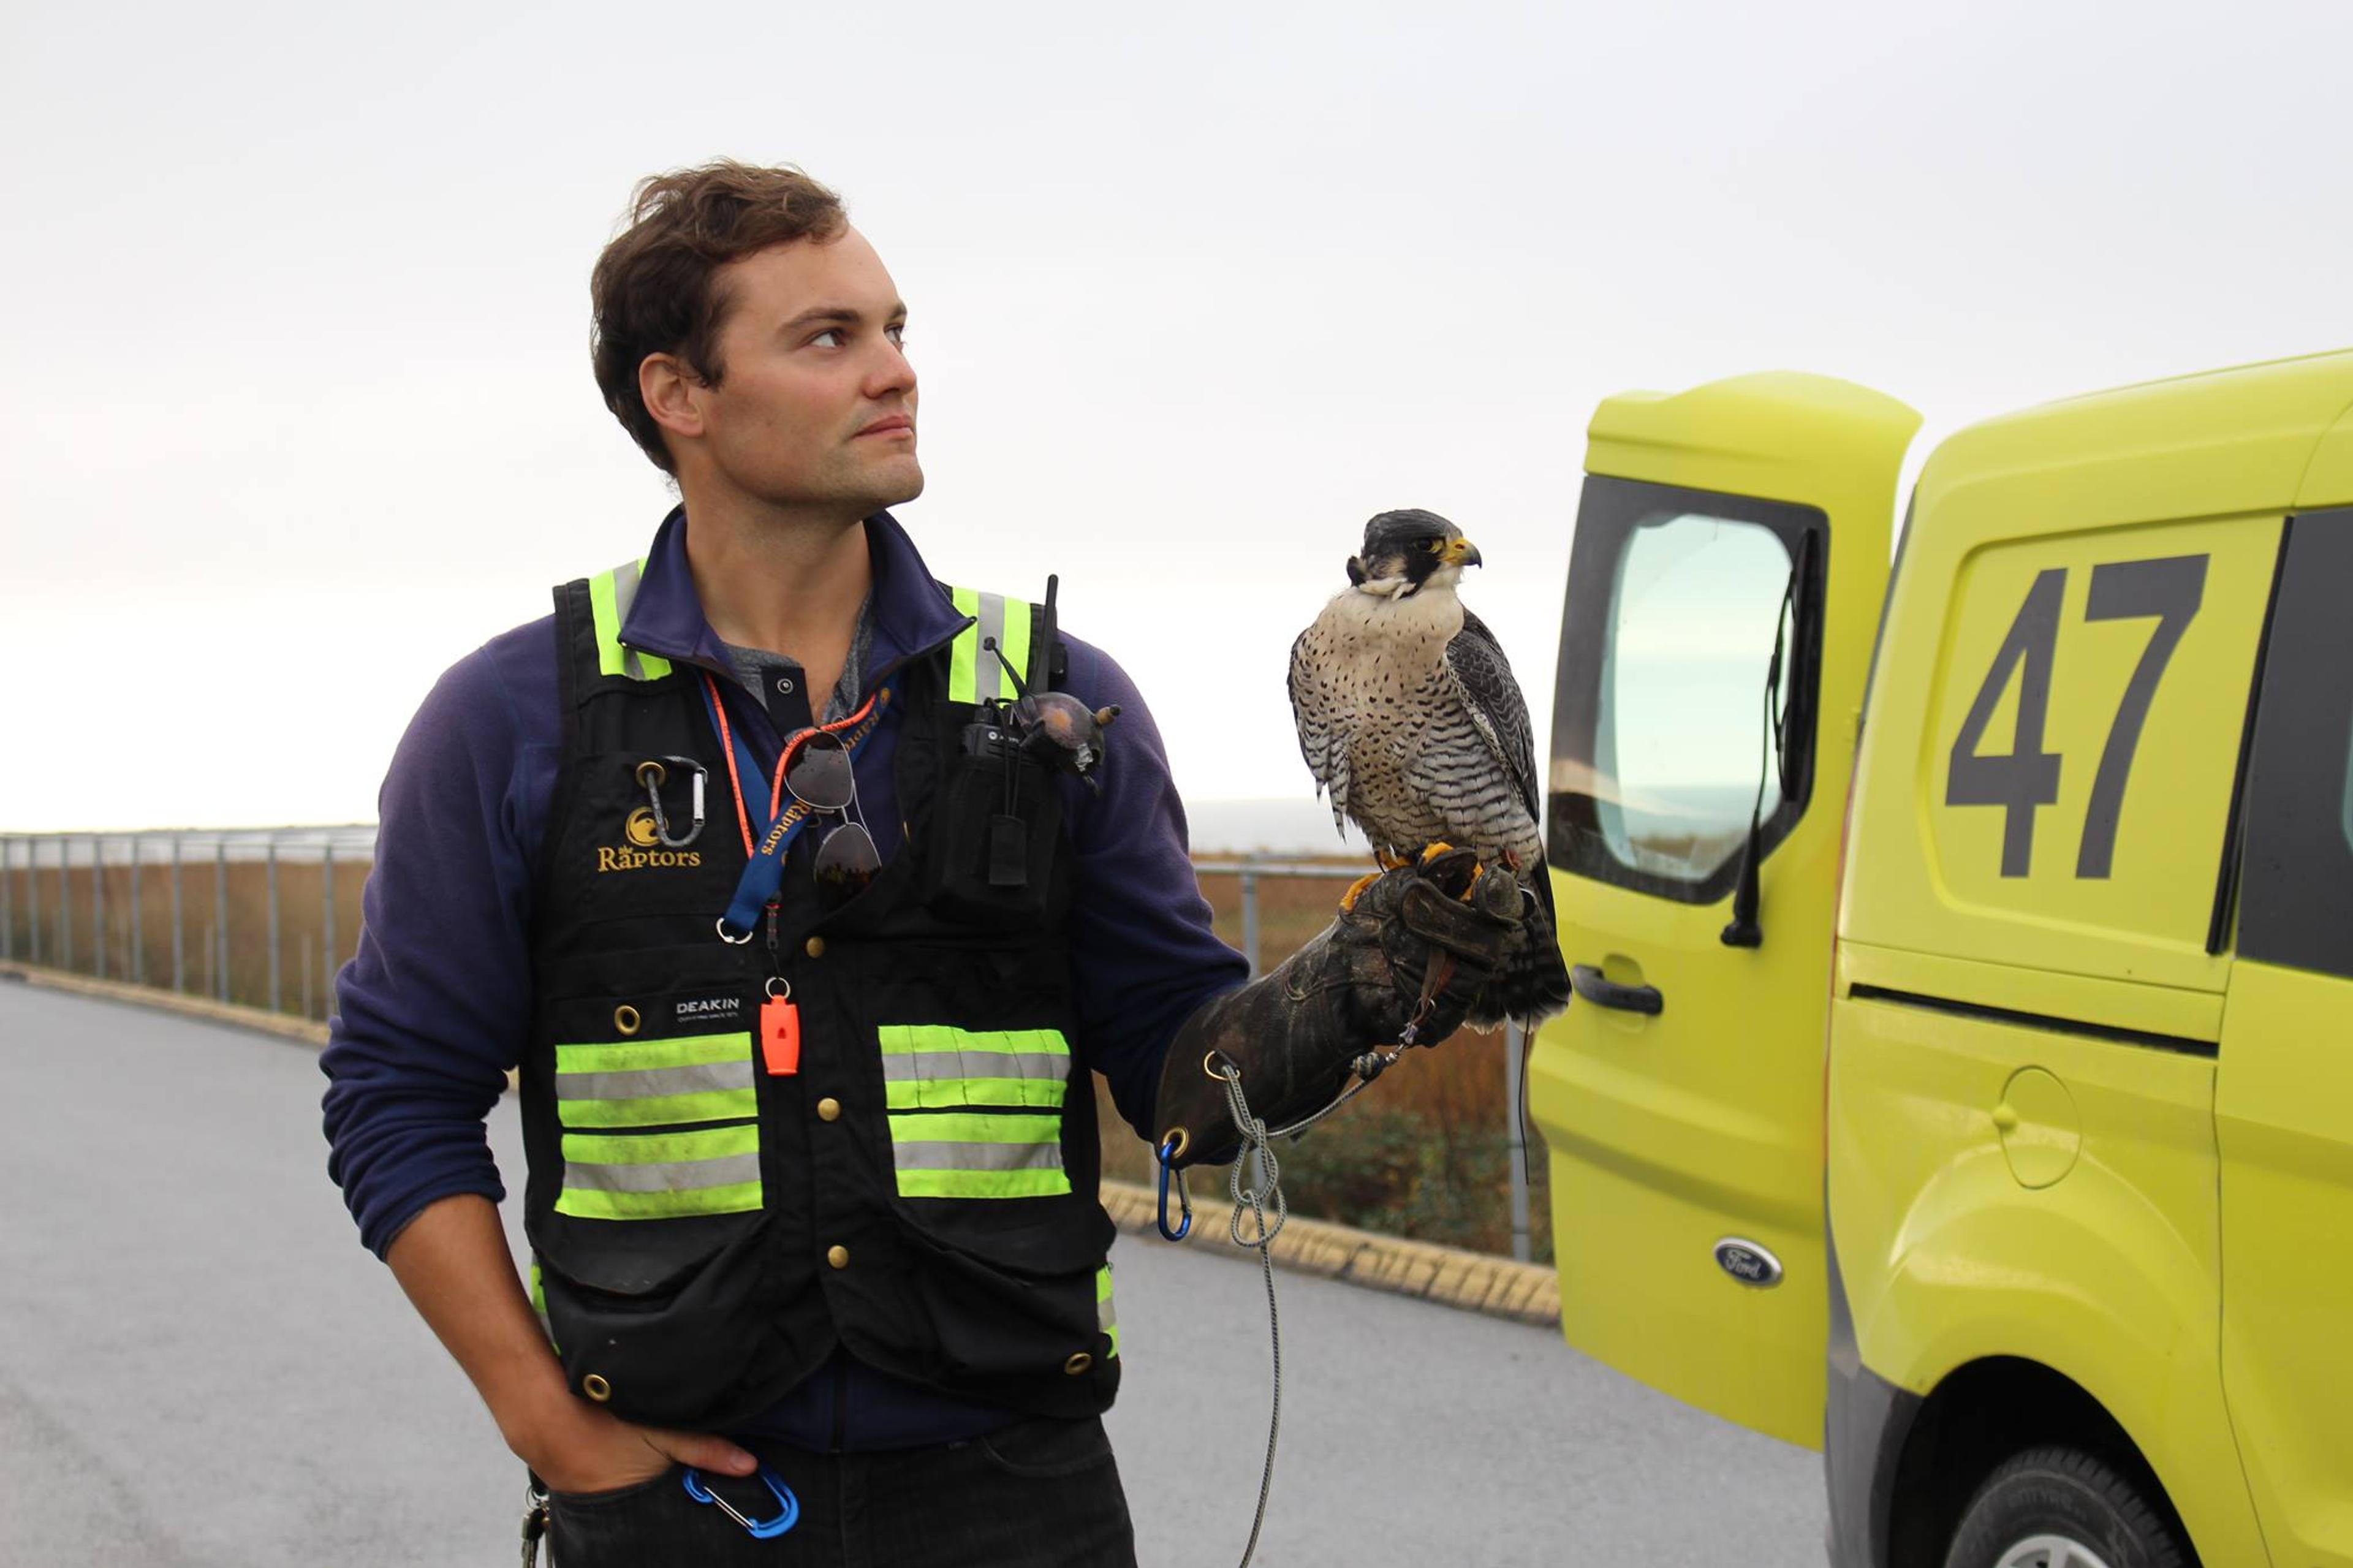 A man in a high-vis vest stands with a falcon on his glove